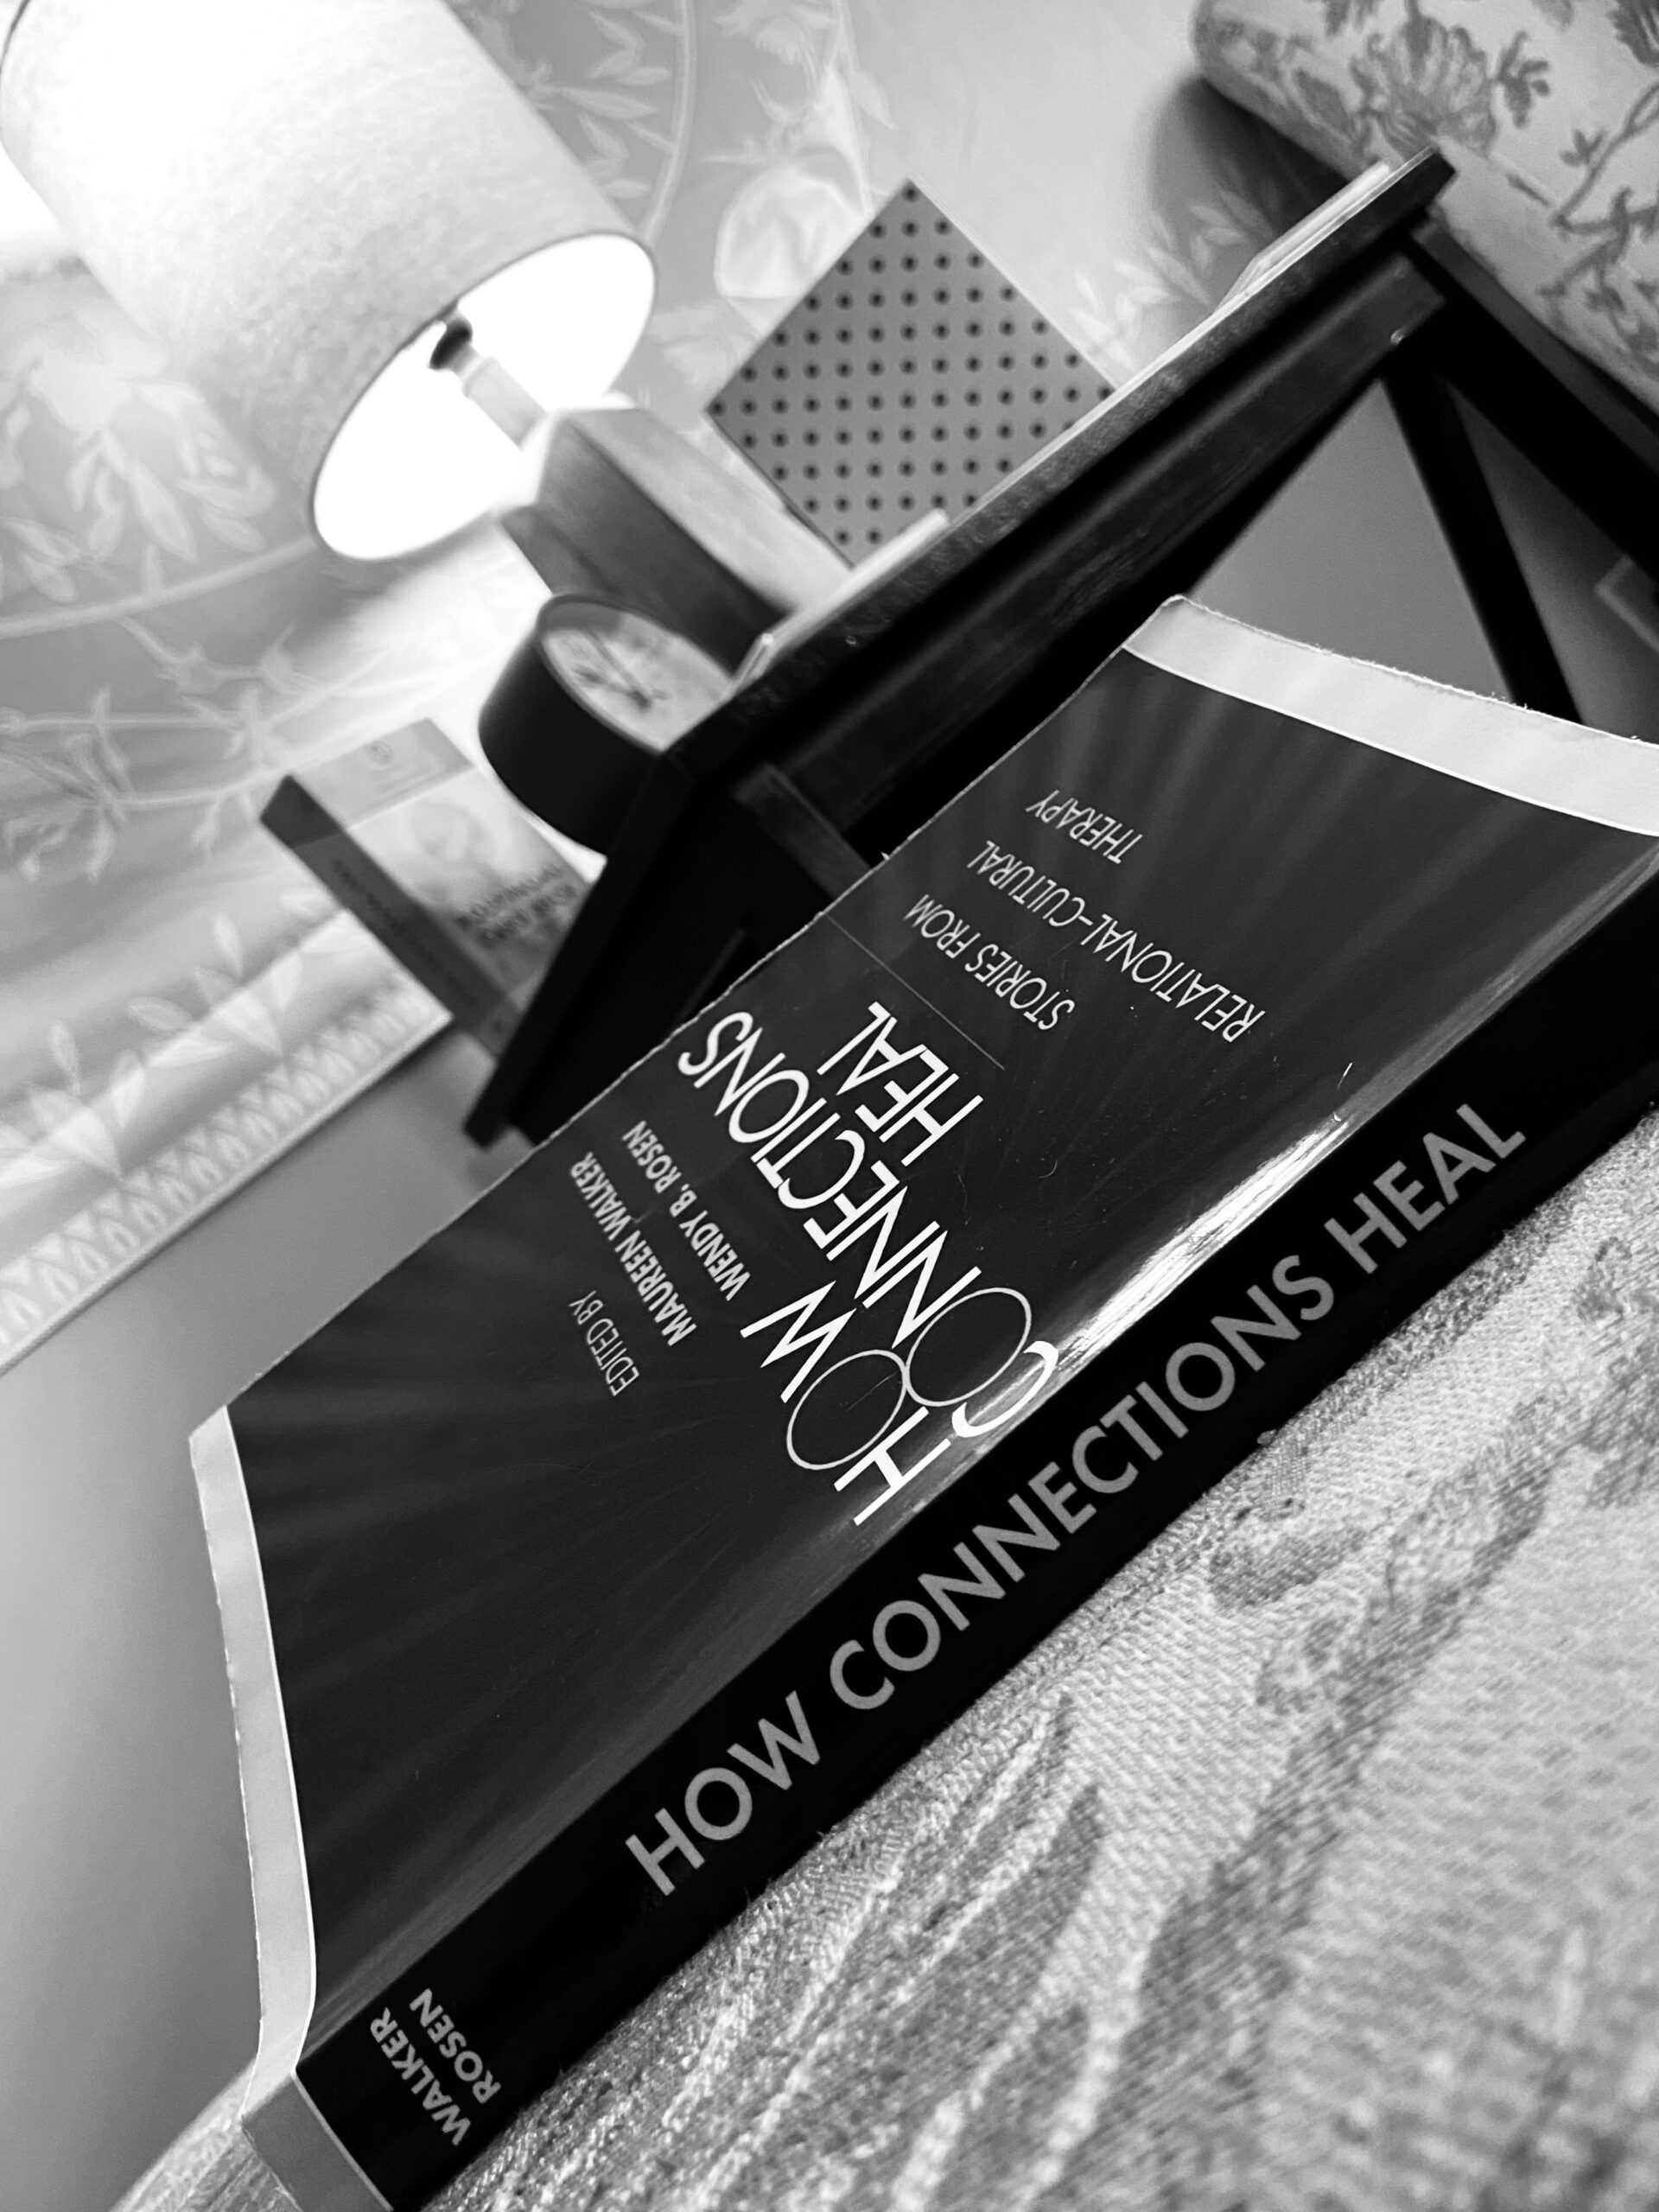 picture of the book "How Connections Heal" on a windowsill